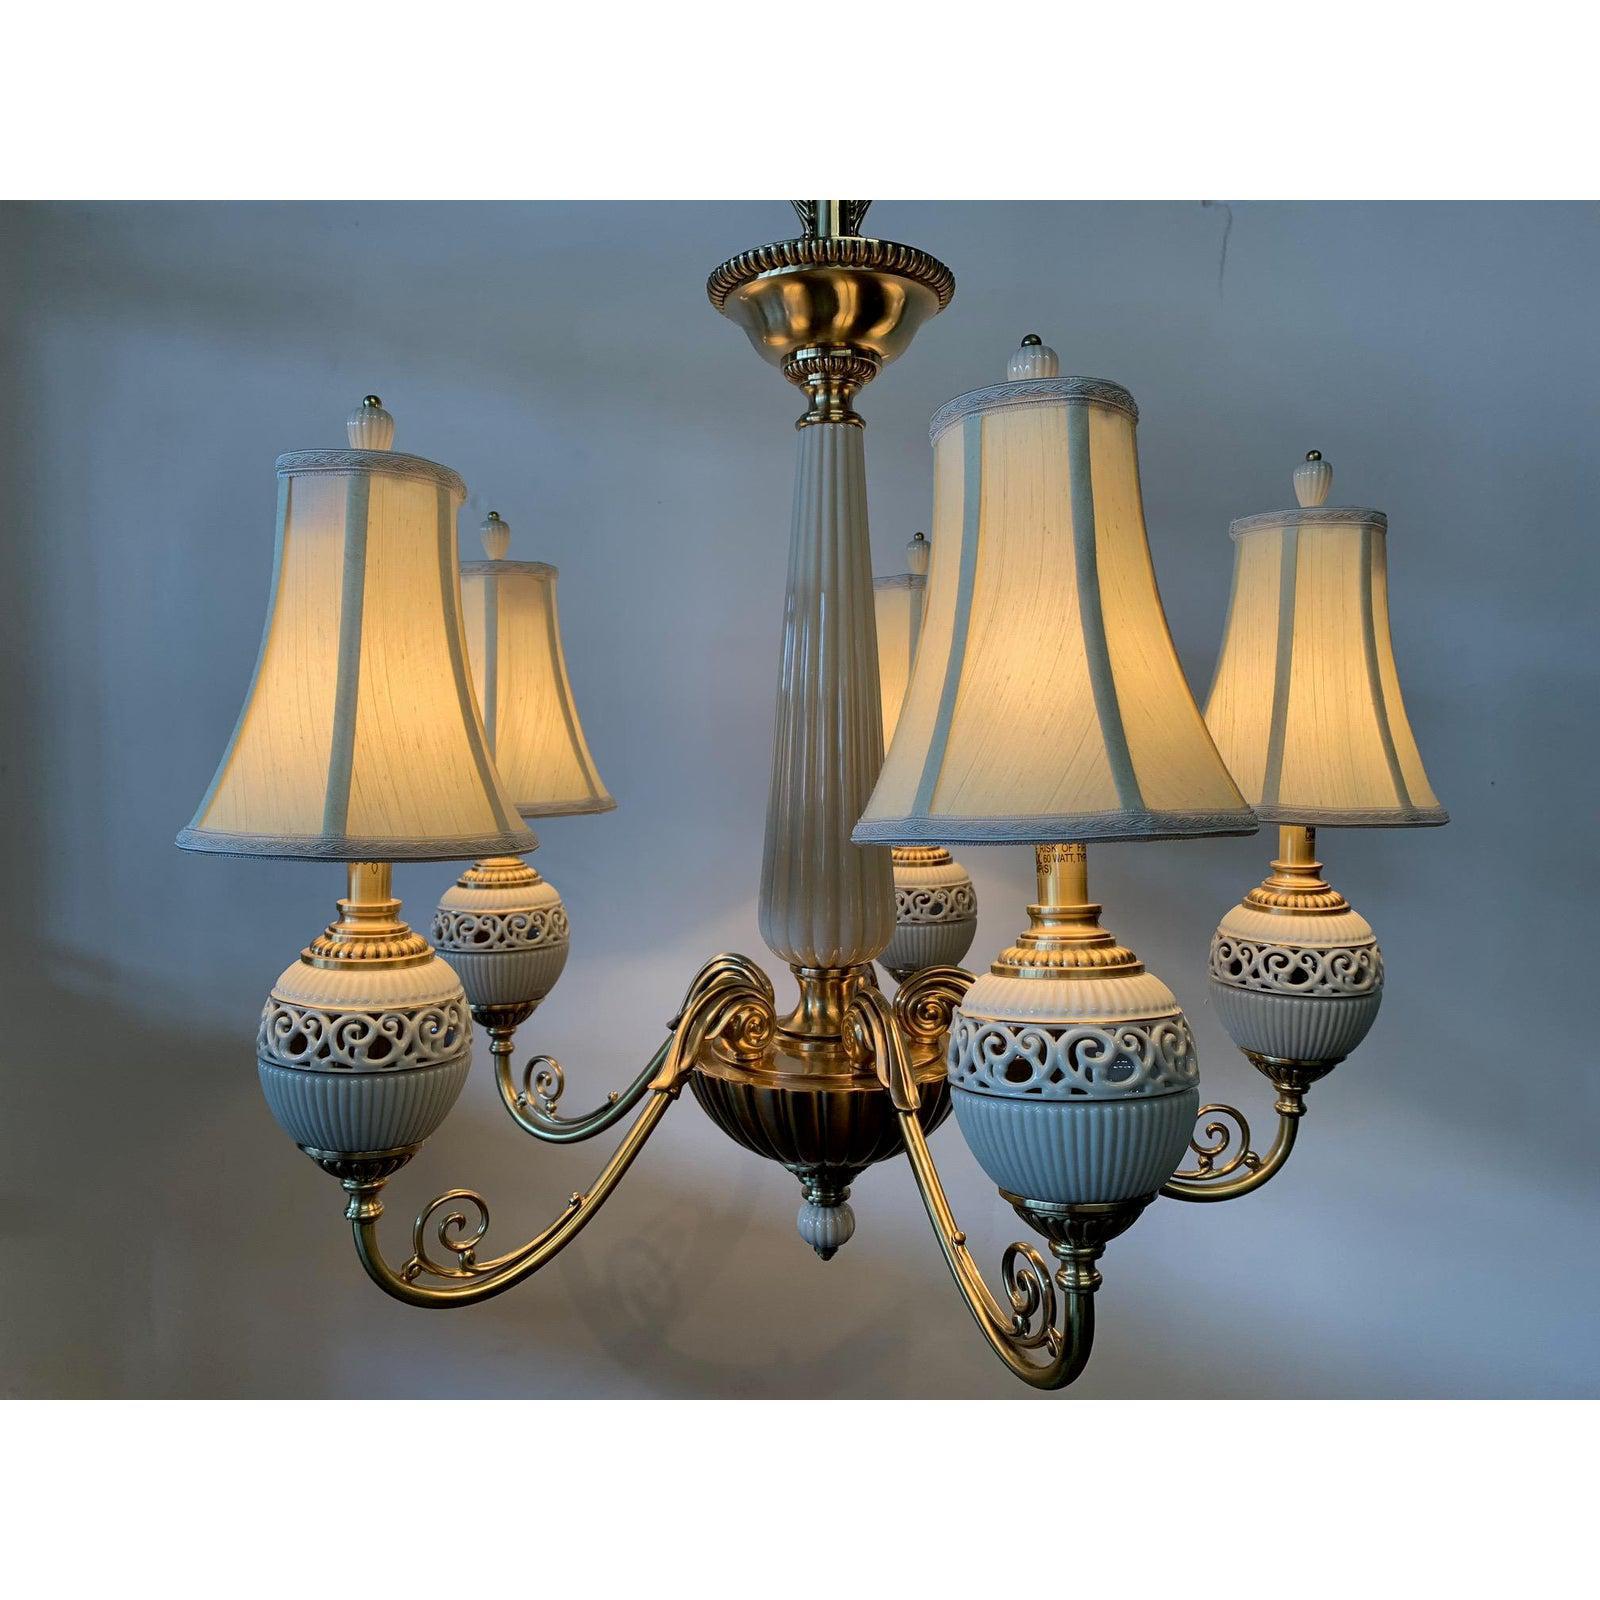 5-light chandelier by Lenox features solid brass with ceramic accents and sculptural shades. Excellent condition with only one minor abrasion that is unseen when hanging (see last photo). 
       